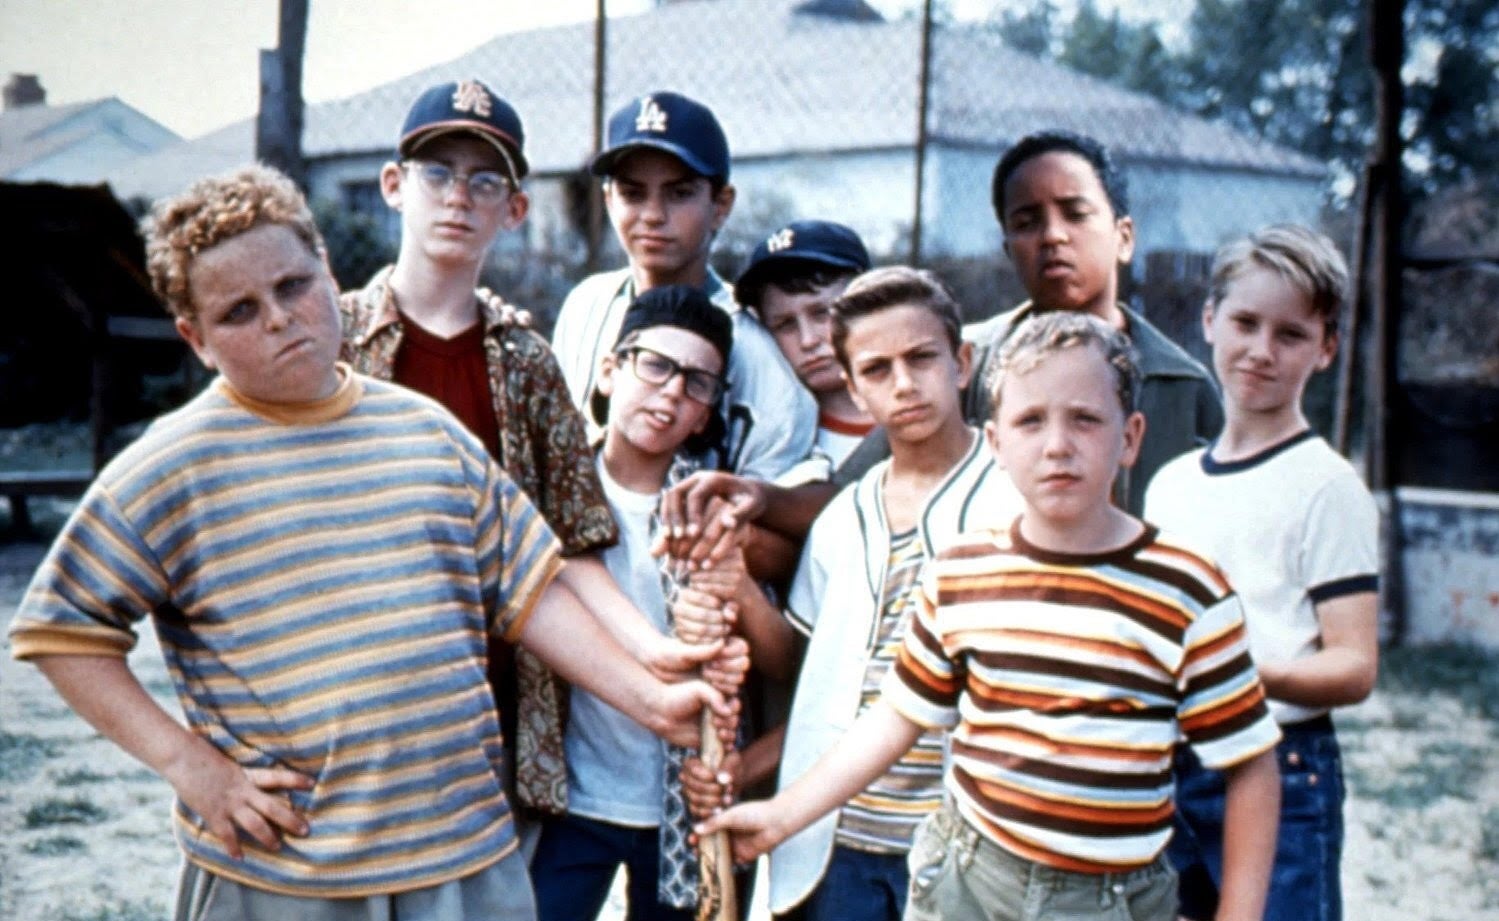 Photograph of the cast of the Sandlot in character, holding a bat